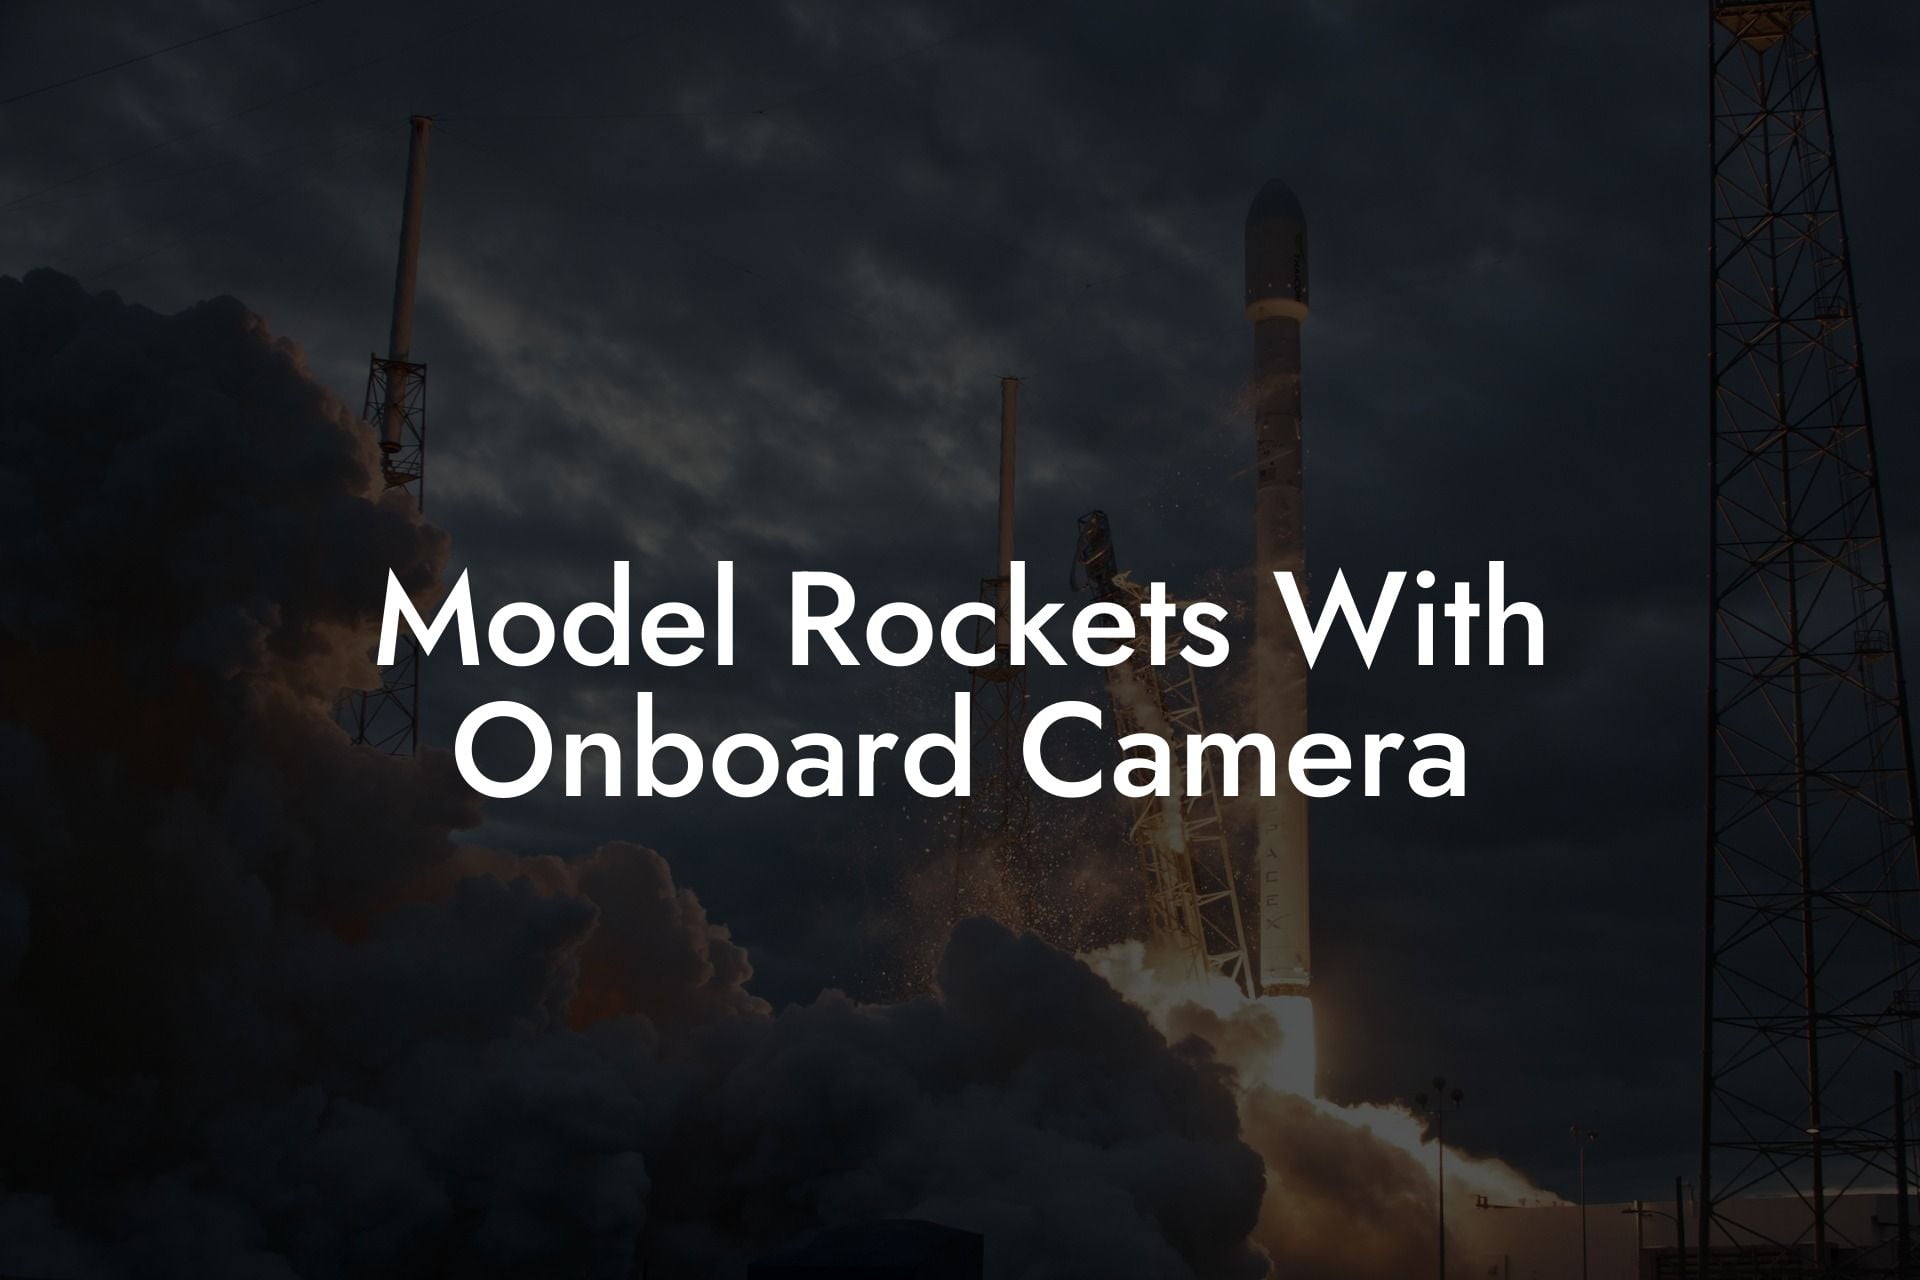 Model Rockets With Onboard Camera